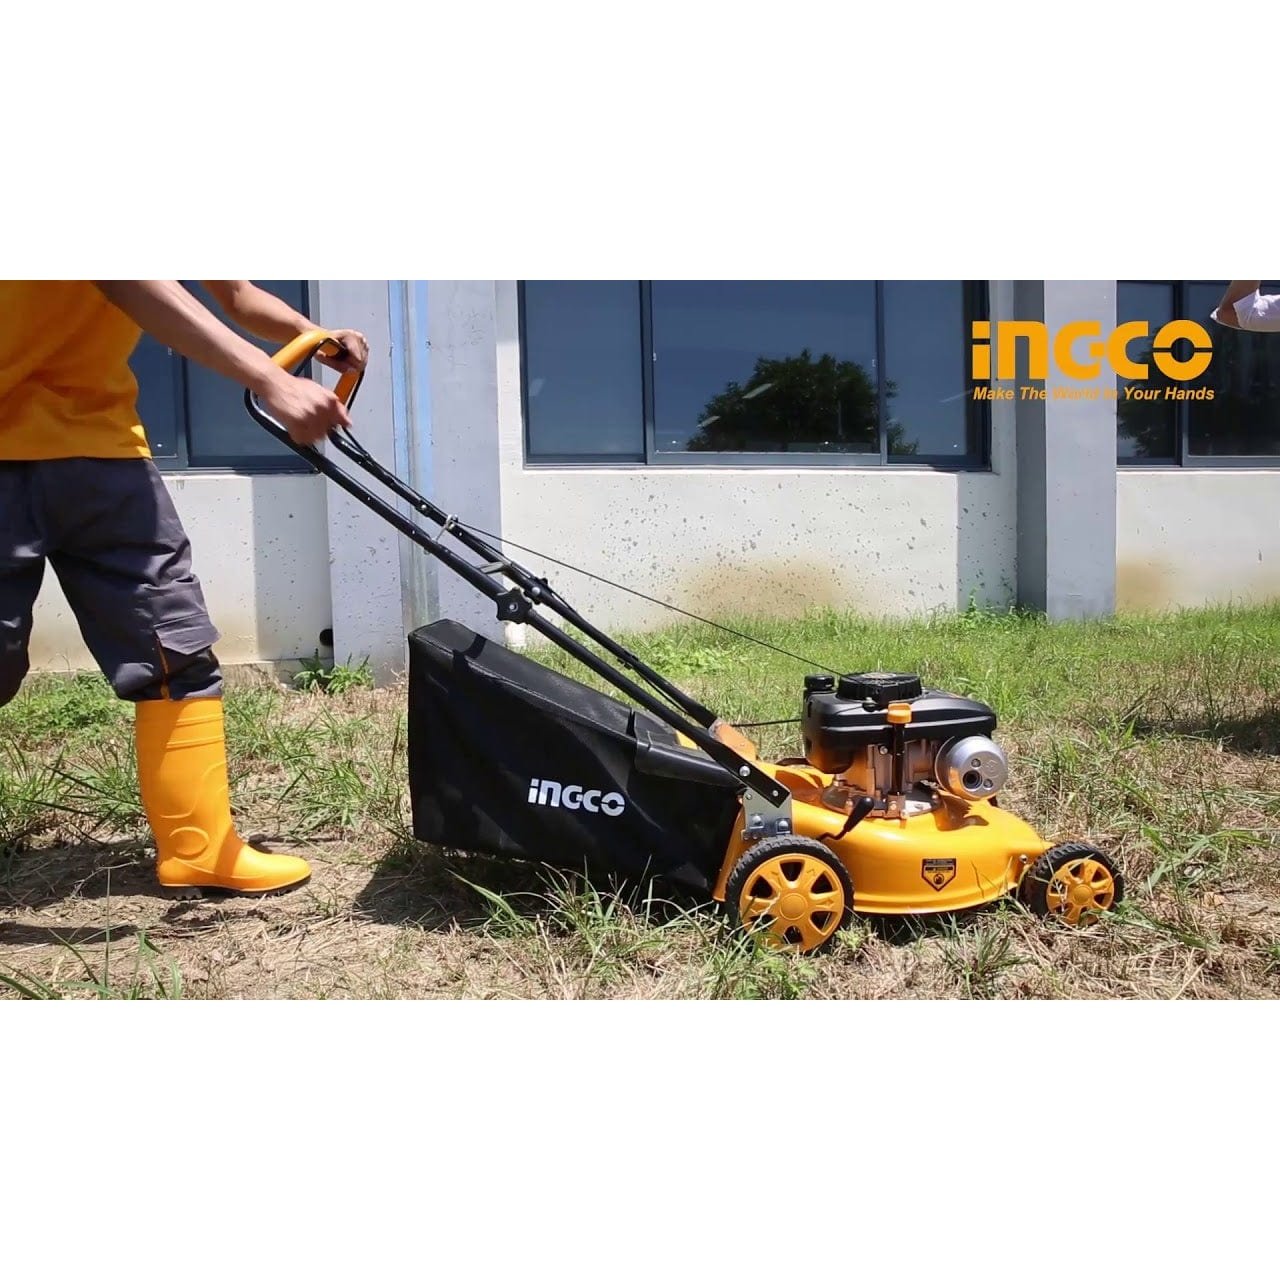 Ingco Gasoline Lawn Mower 4HP 3.0kW - GLM141181 - Buy Online in Accra, Ghana at Supply Master Lawn Mower Buy Tools hardware Building materials